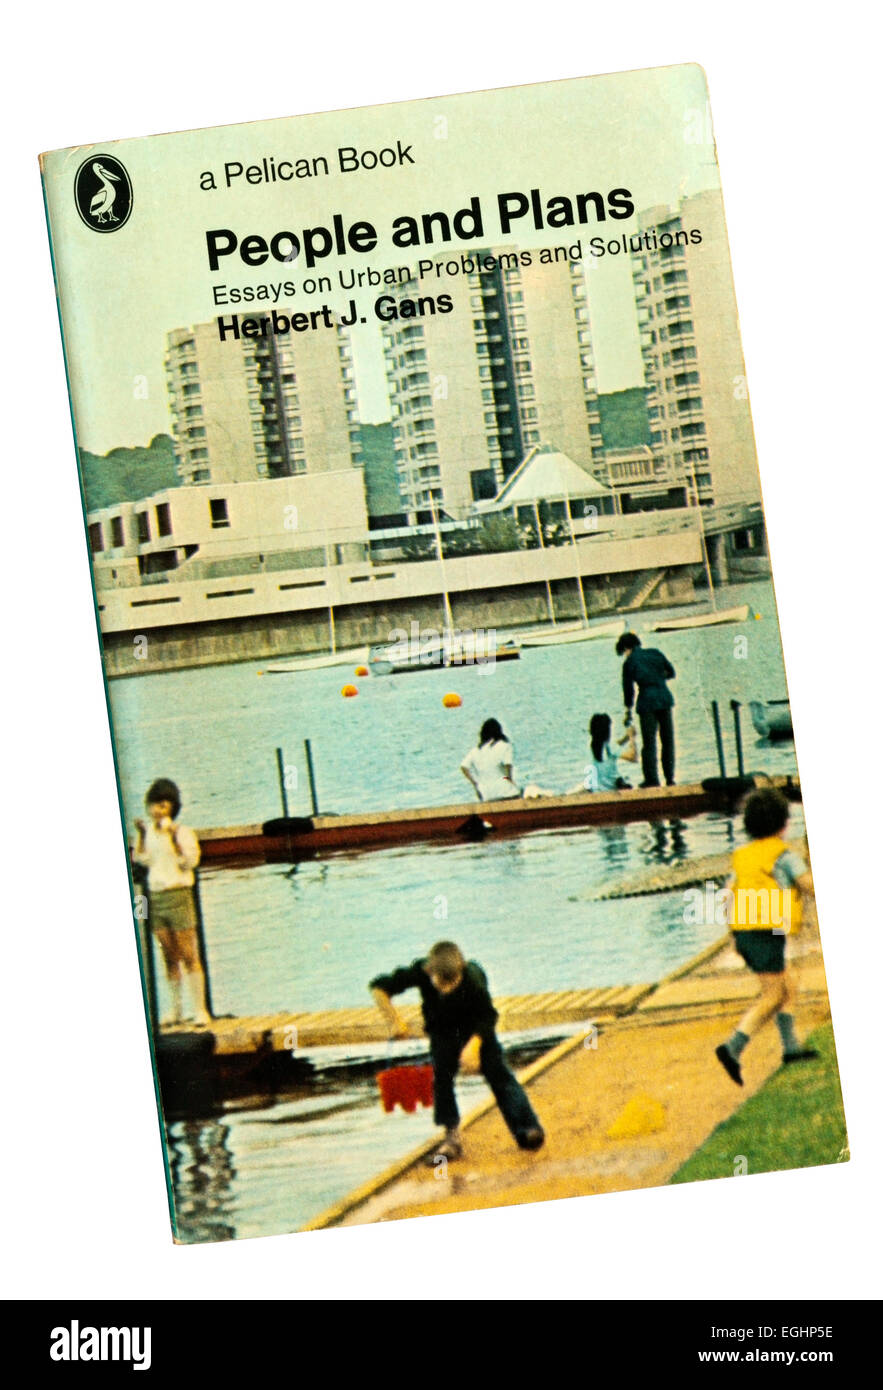 People and Plans : essays on urban problems and solutions by Herbert J. Gans was first published in 1968. Stock Photo